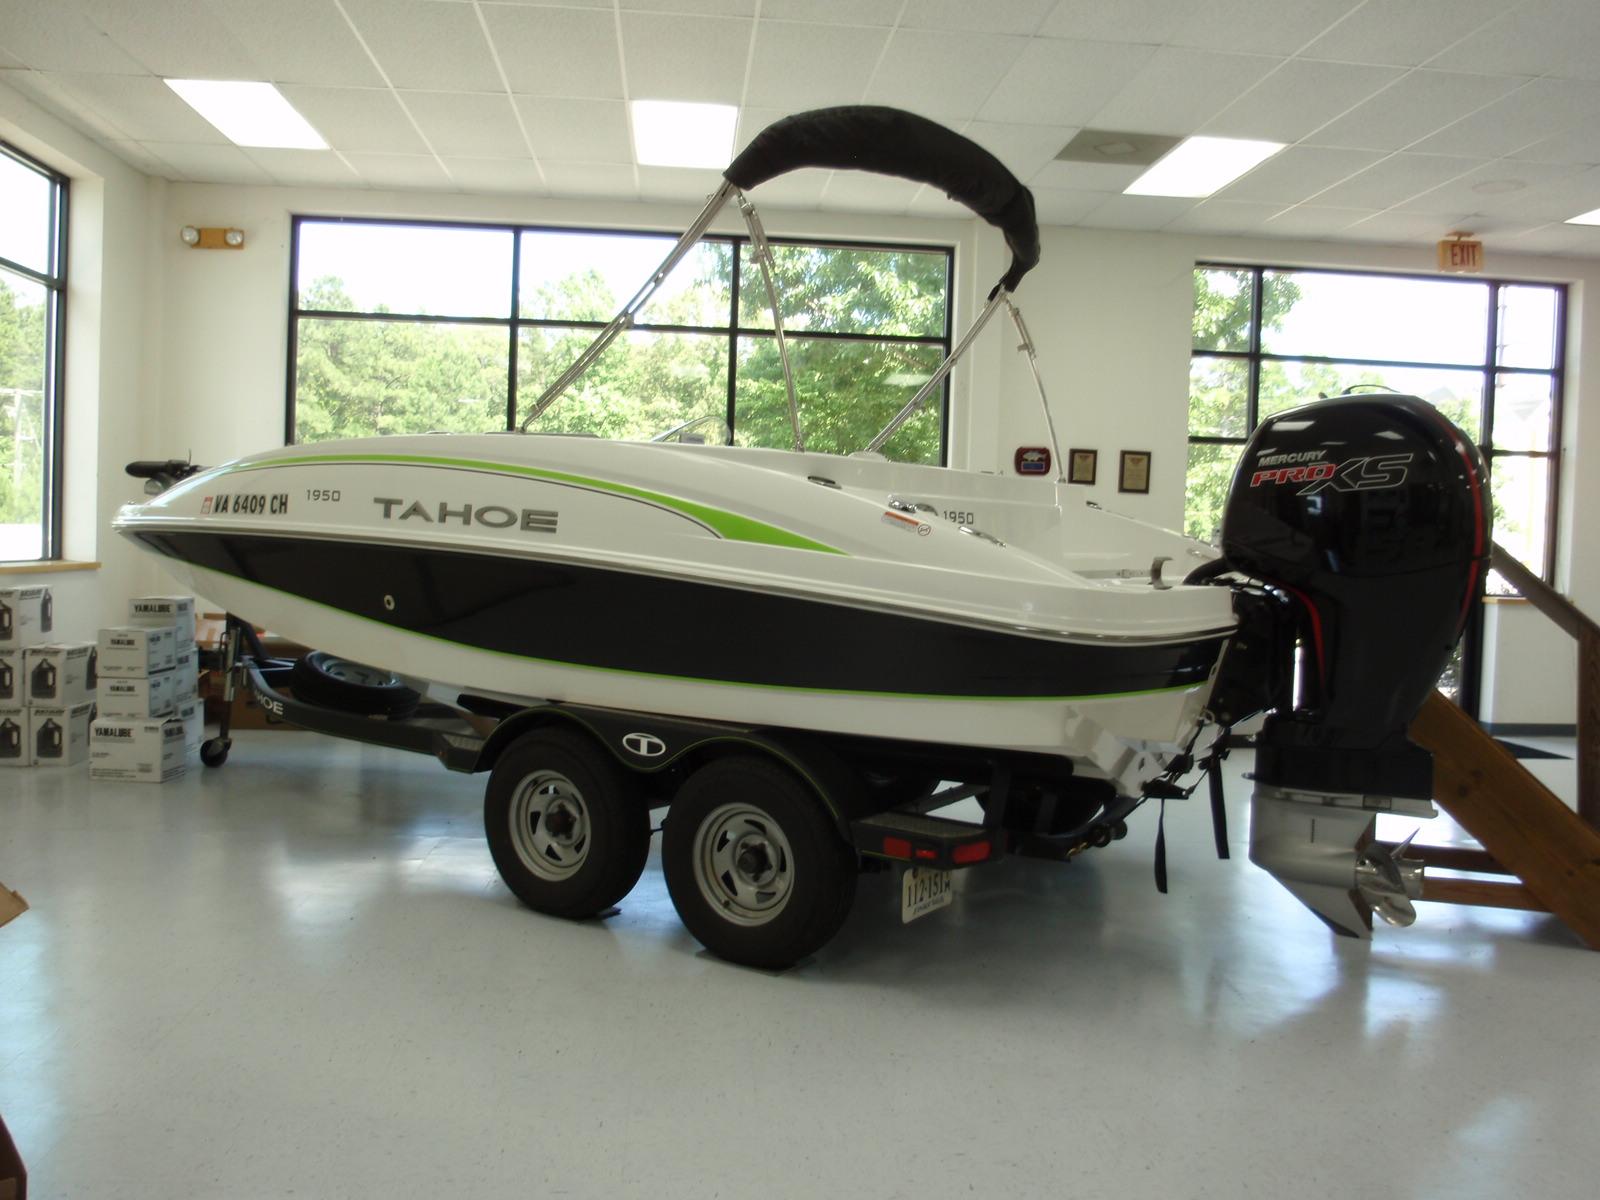 Used 2021 Tahoe 1950, 23836 Chester - Boat Trader